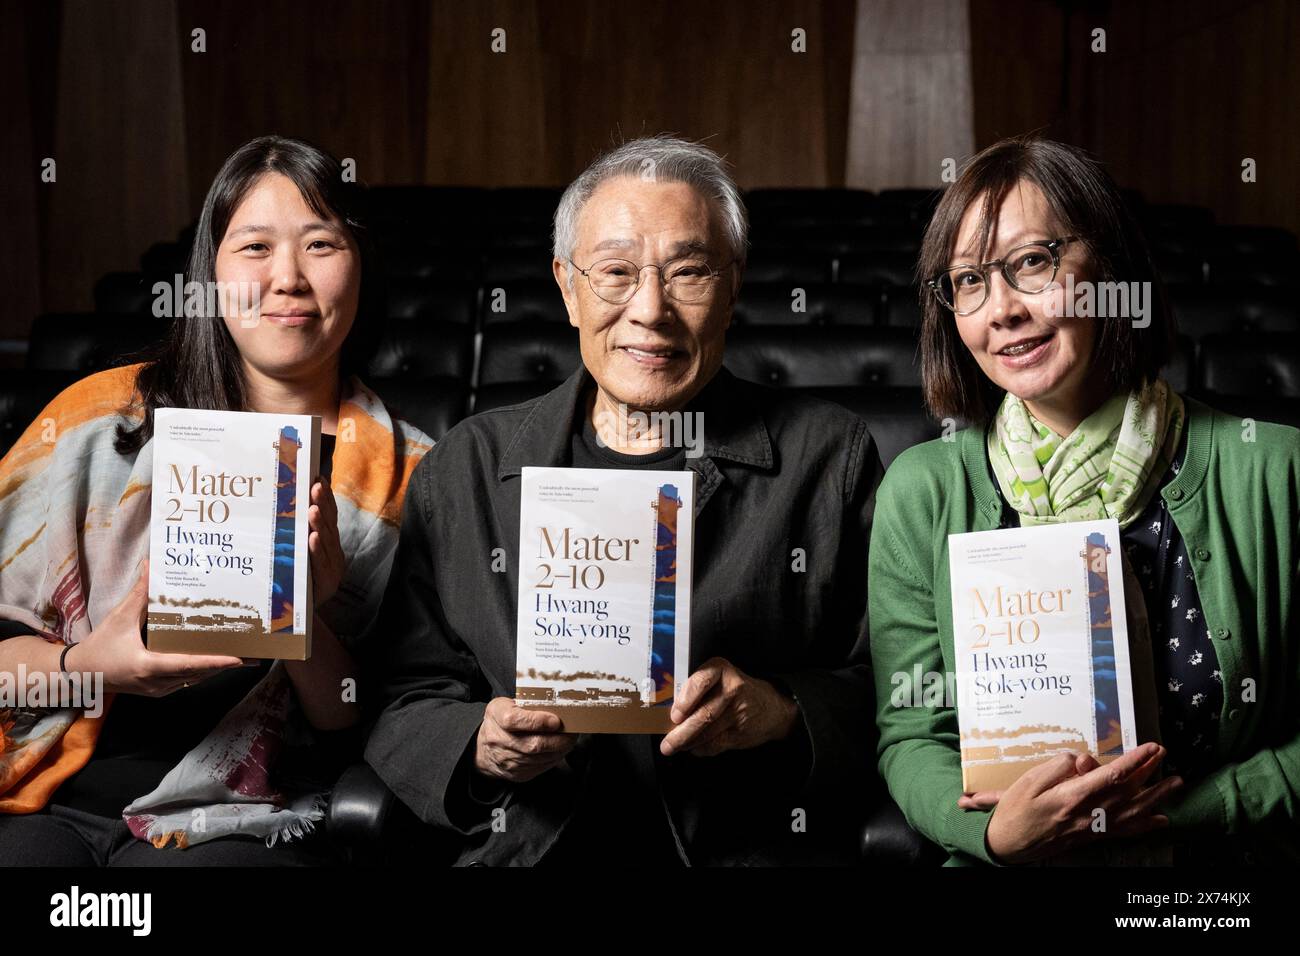 London, UK.  17 May 2024. (C) Author Hwang Sok-yong (Korean) and translators (R) Sora Kim-Russell (Korean/American) and Youngjae Josephine Bae (Korean) for ‘Mater 2-10’at a photocall for The International Booker Prize Shortlist at the Southbank Centre, ahead of the winner being announced on 21 May at Tate Modern.  The prize celebrates novelists and short-story writers from around the world as well as the art of translation by shining a light on the best translated fiction with the winning author and translator sharing the £50,000 prize equally.  Credit: Stephen Chung / Alamy Live News Stock Photo